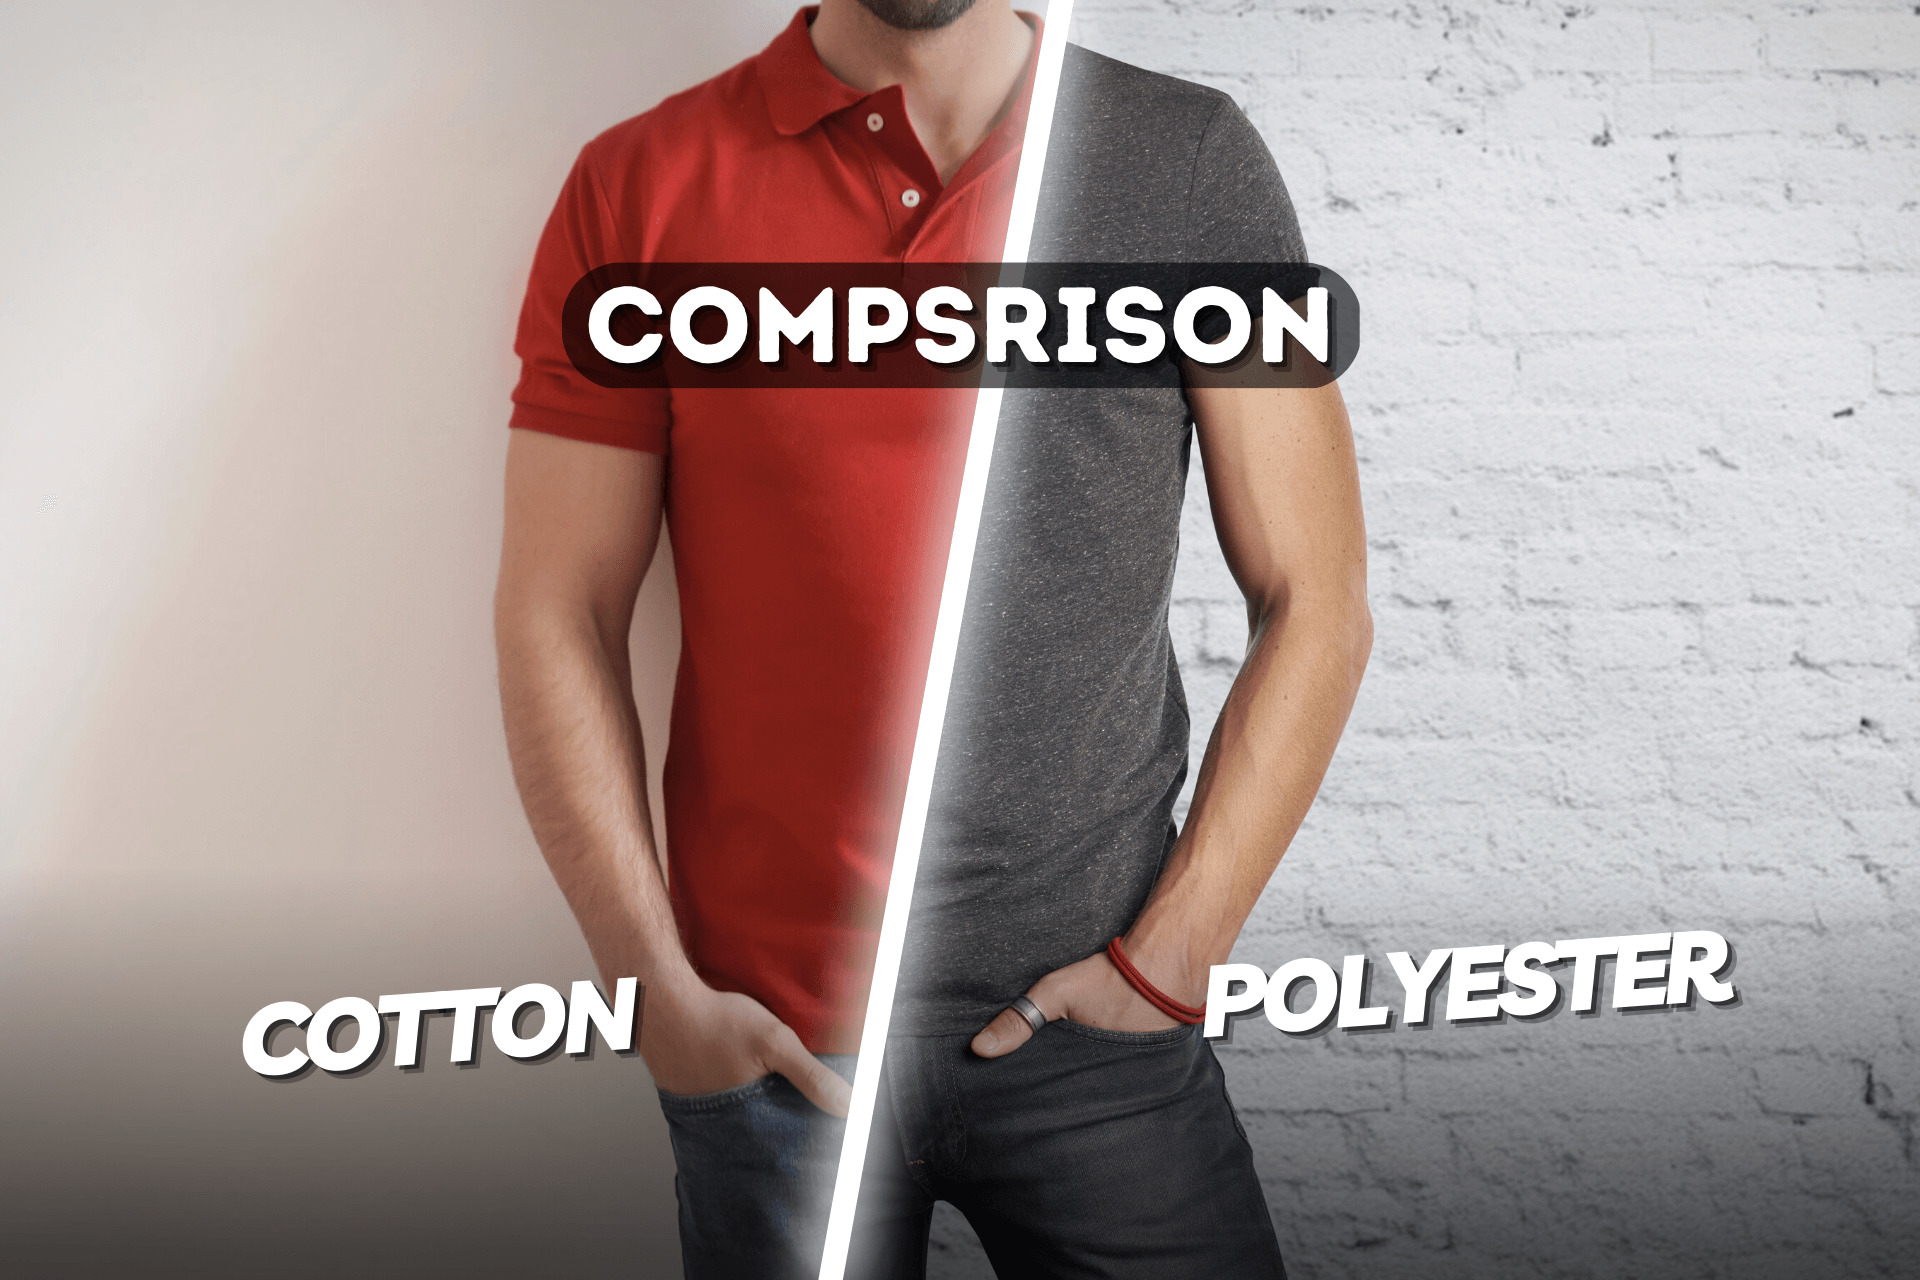 cotton-vs-polyester-which-fabric-is-most-rewarding